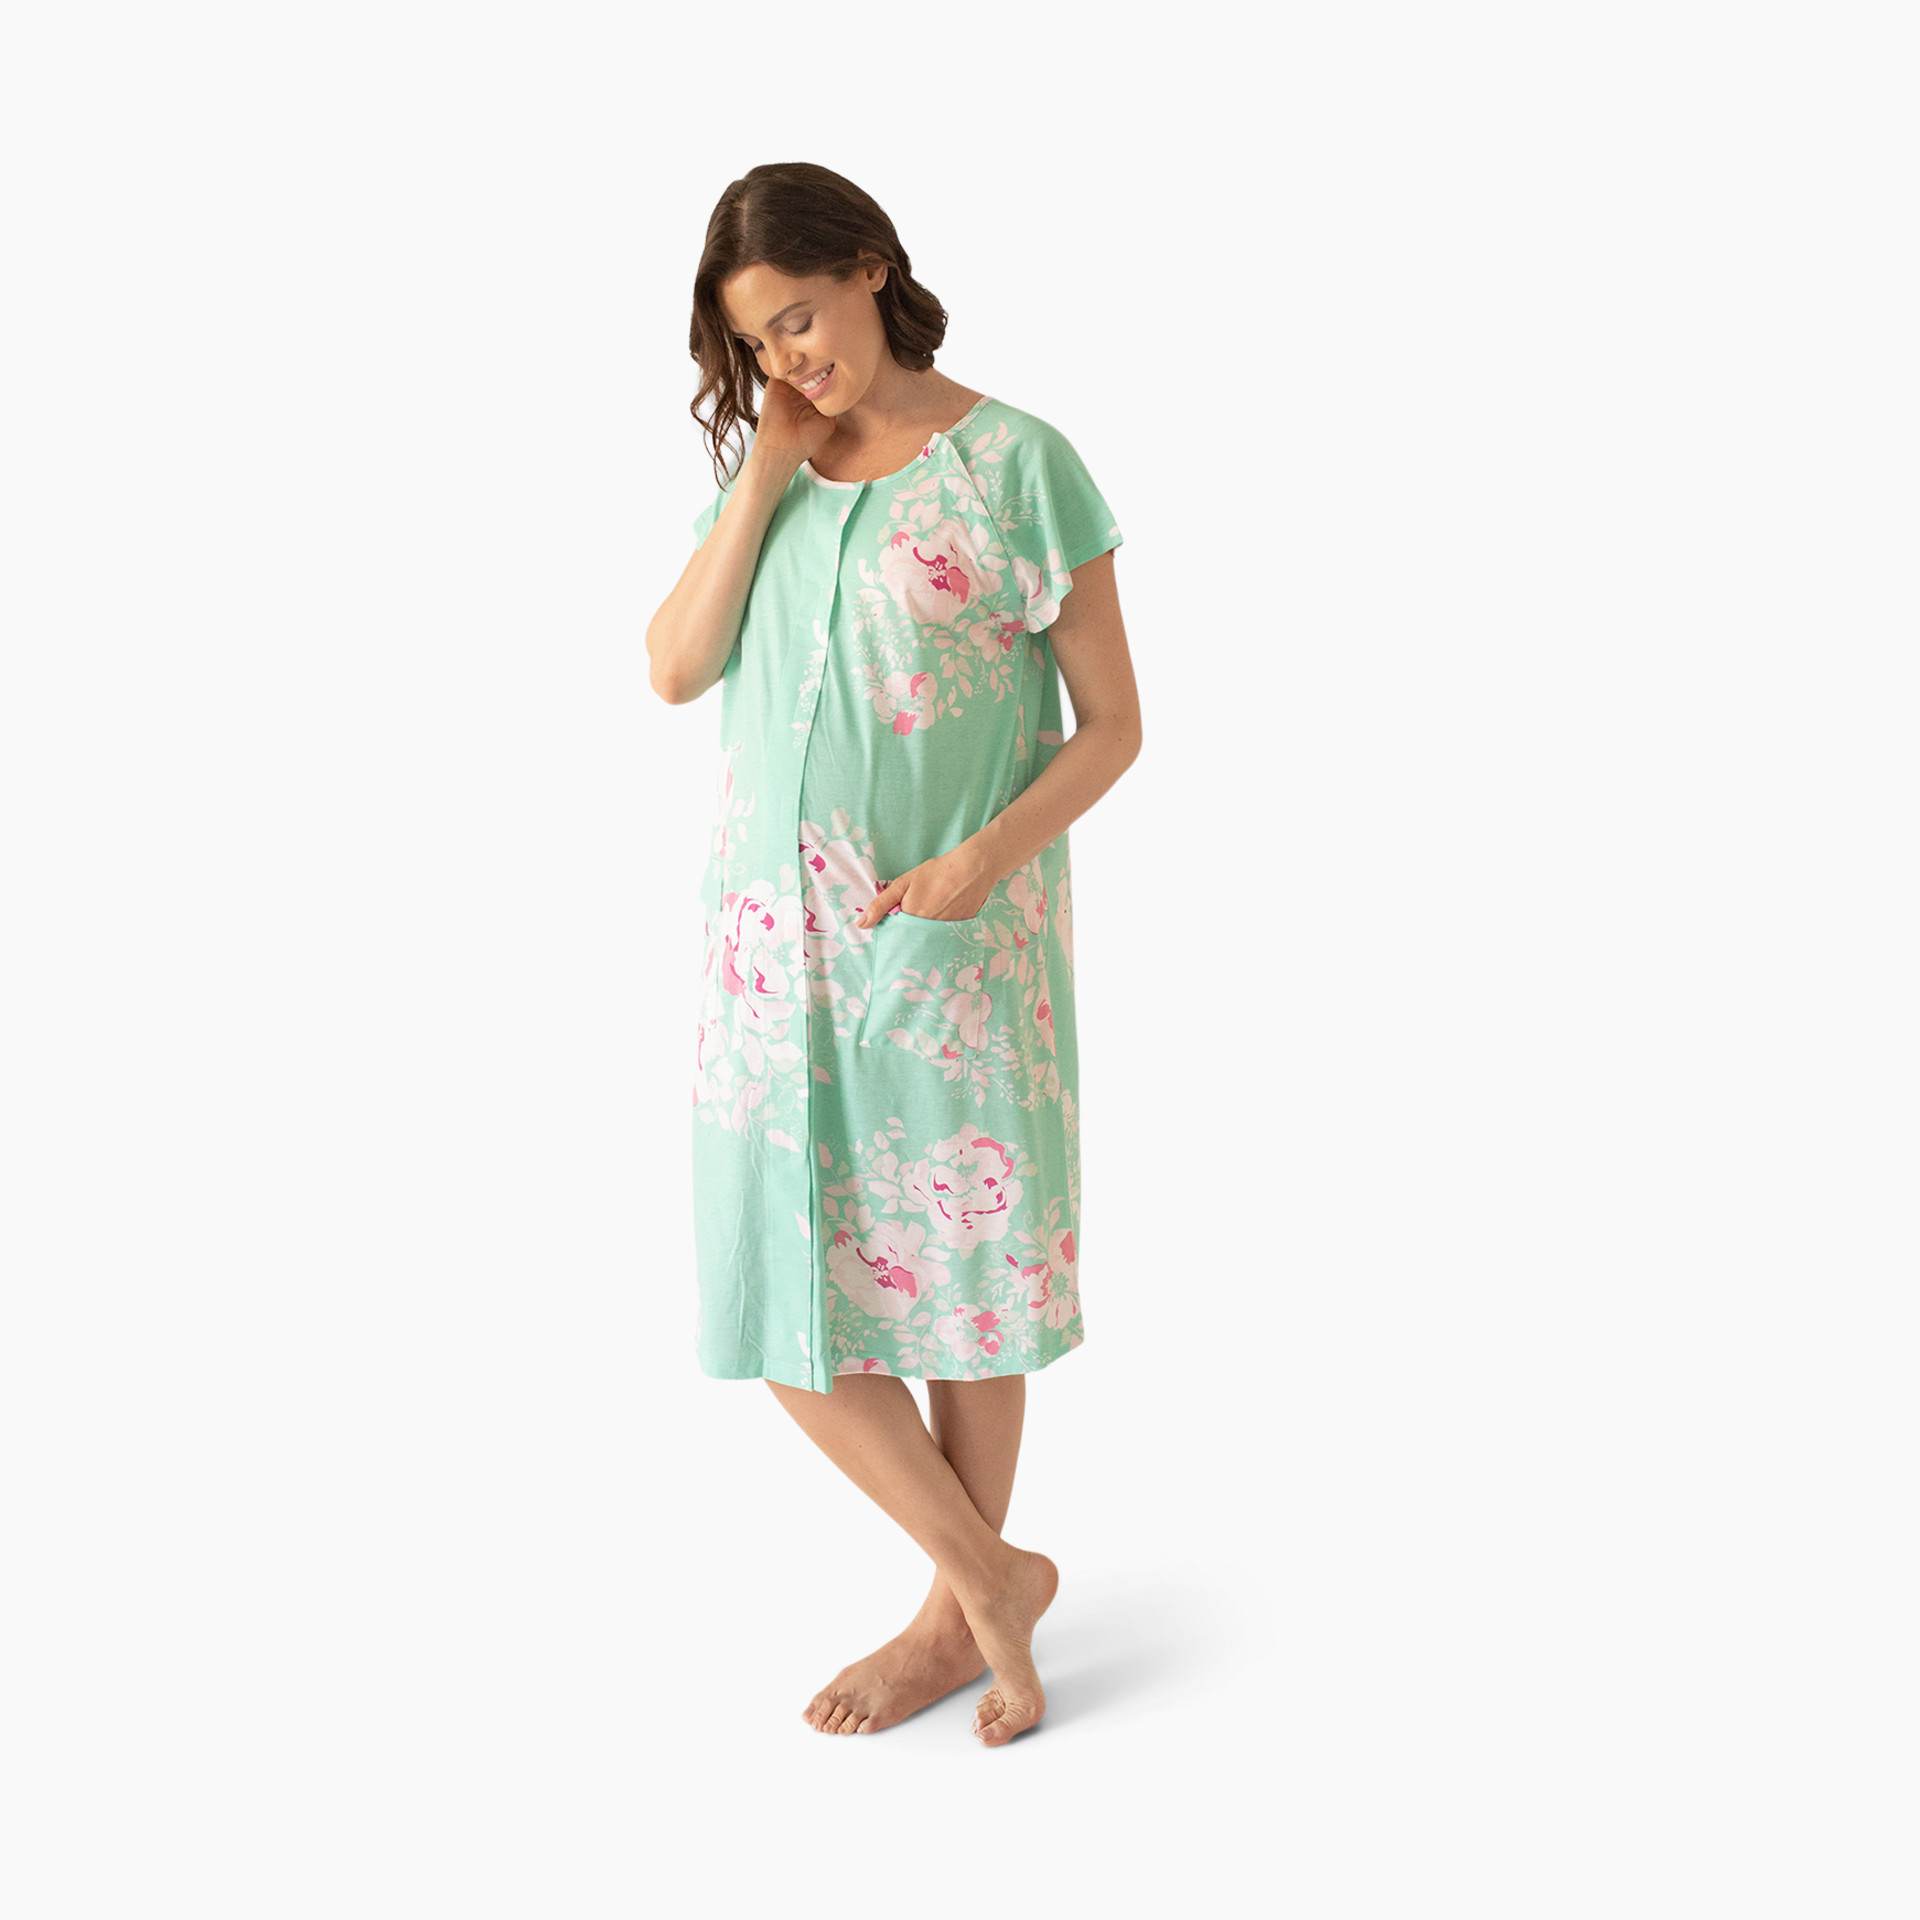 Kindred Bravely Labor and Delivery Gown Features: Velcro front